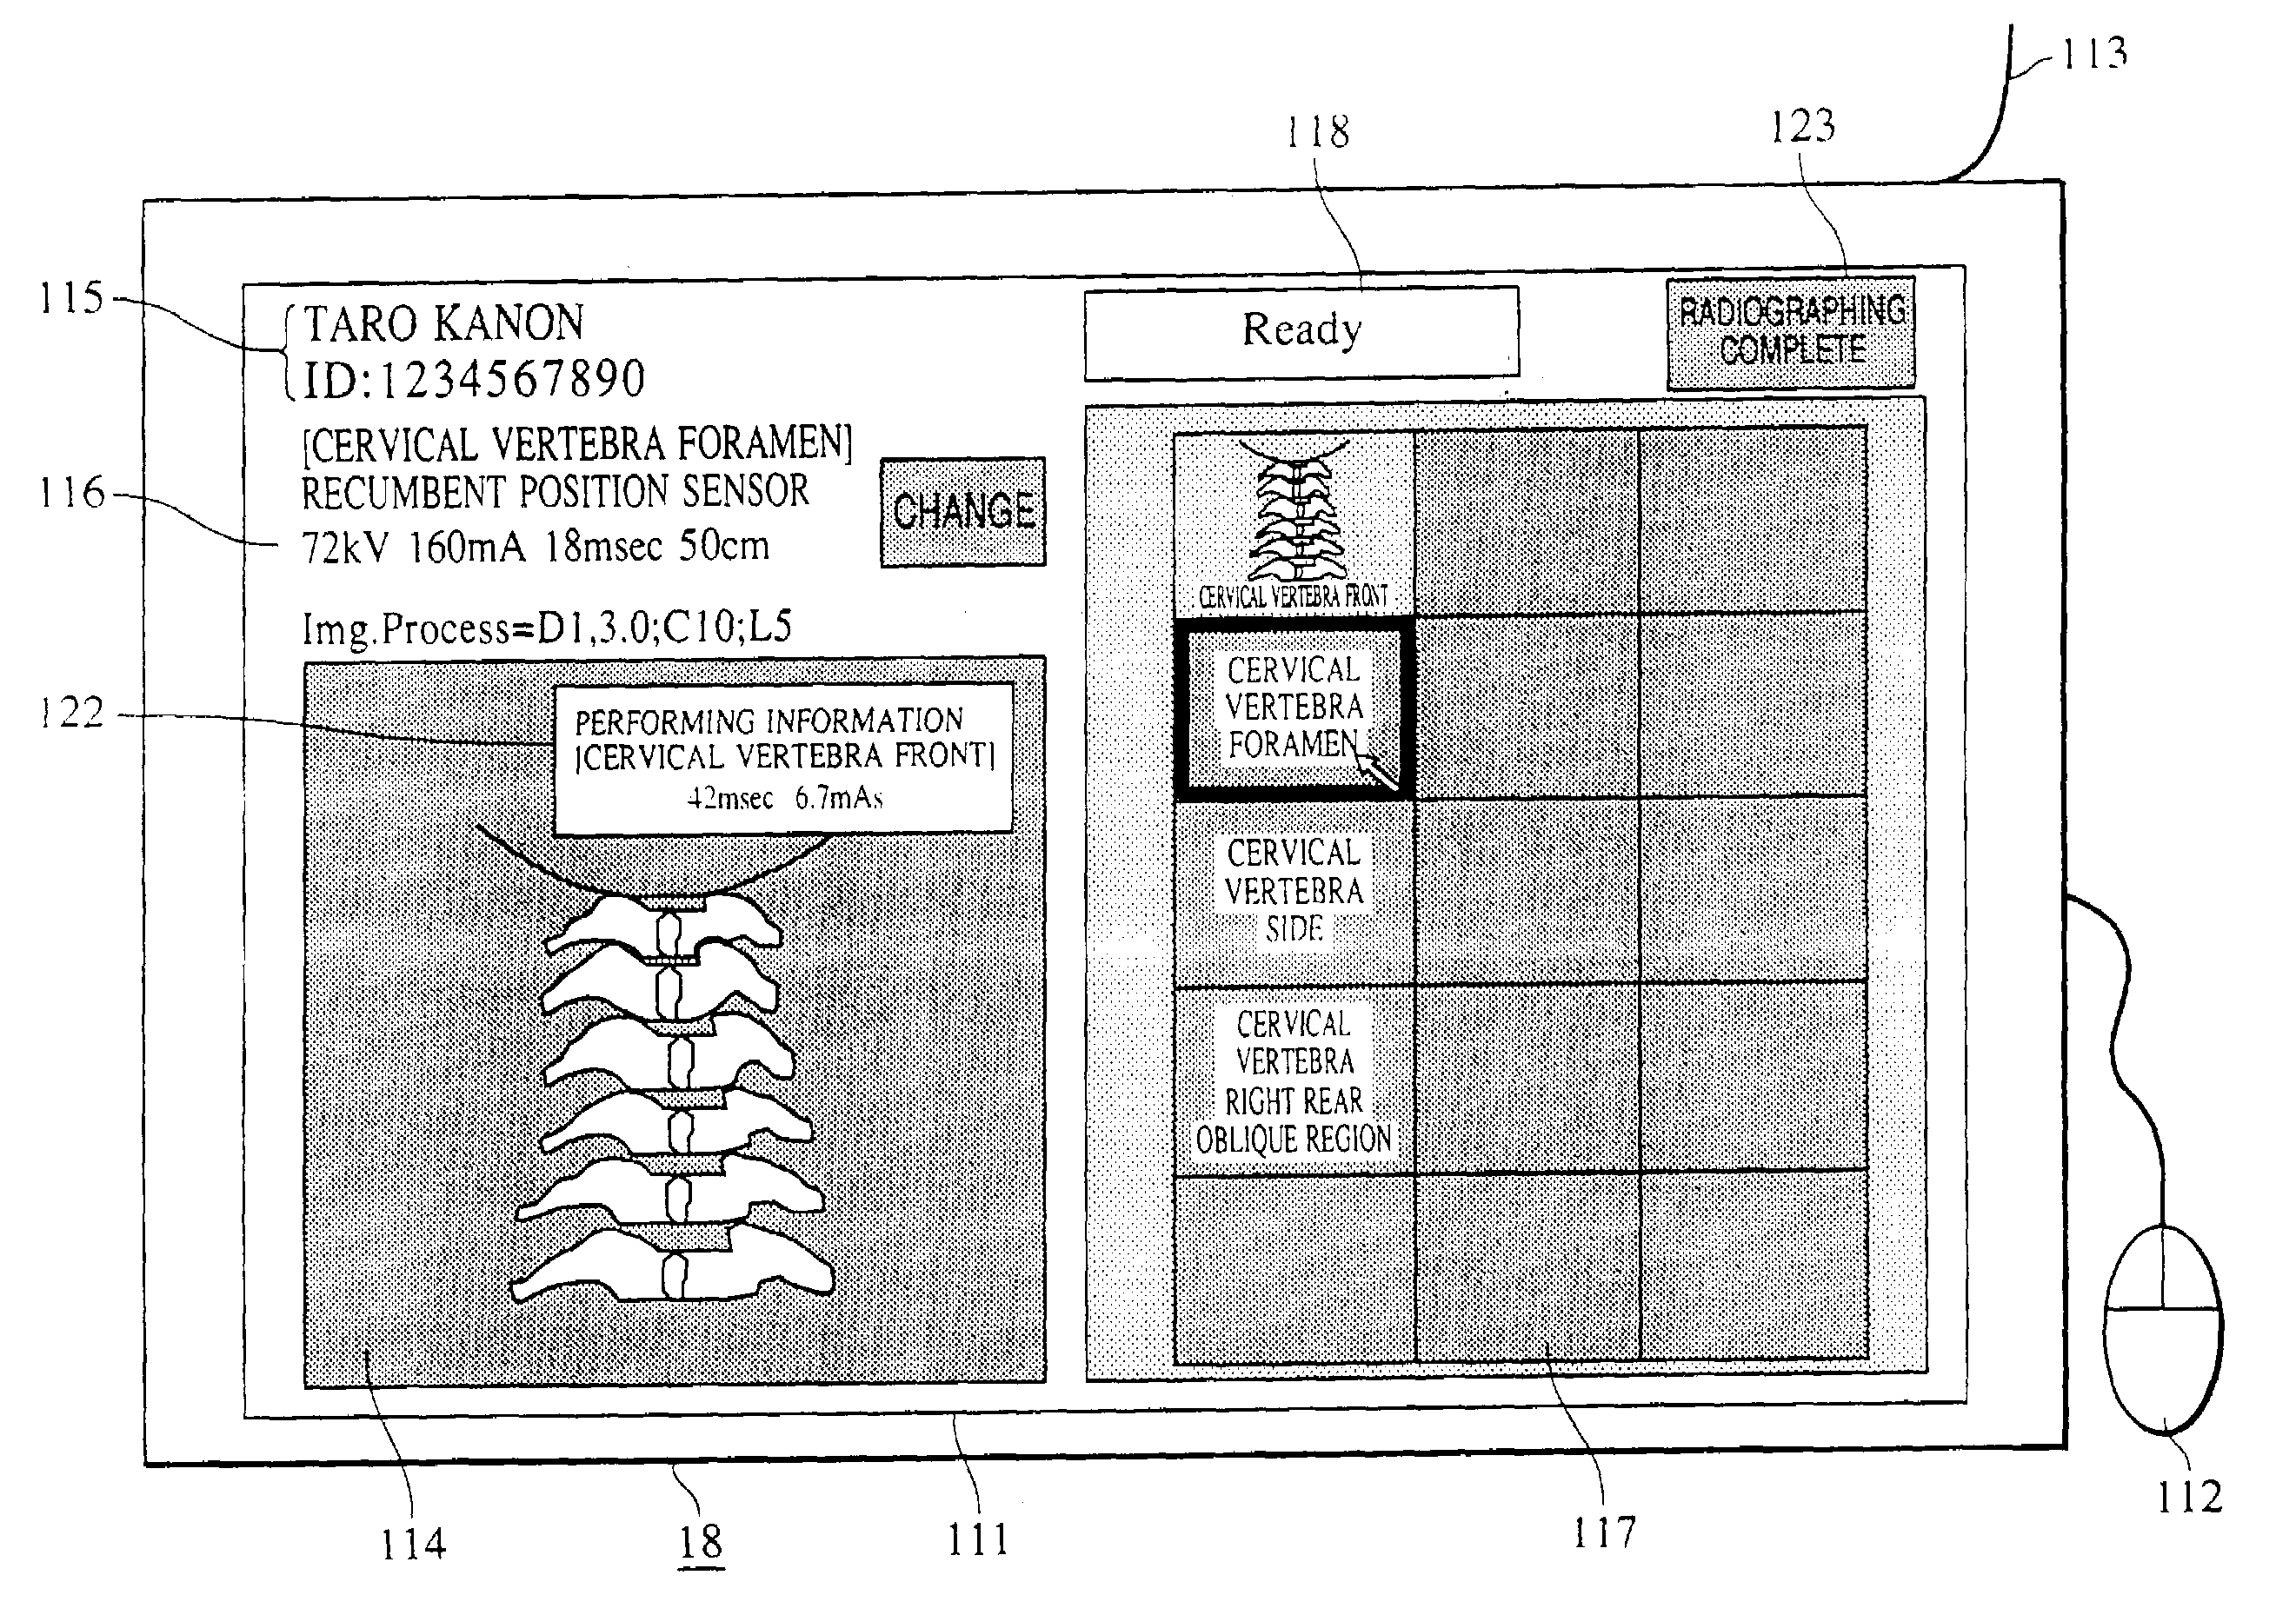 Examination system, image processing apparatus and method, medium, and X-ray photographic system